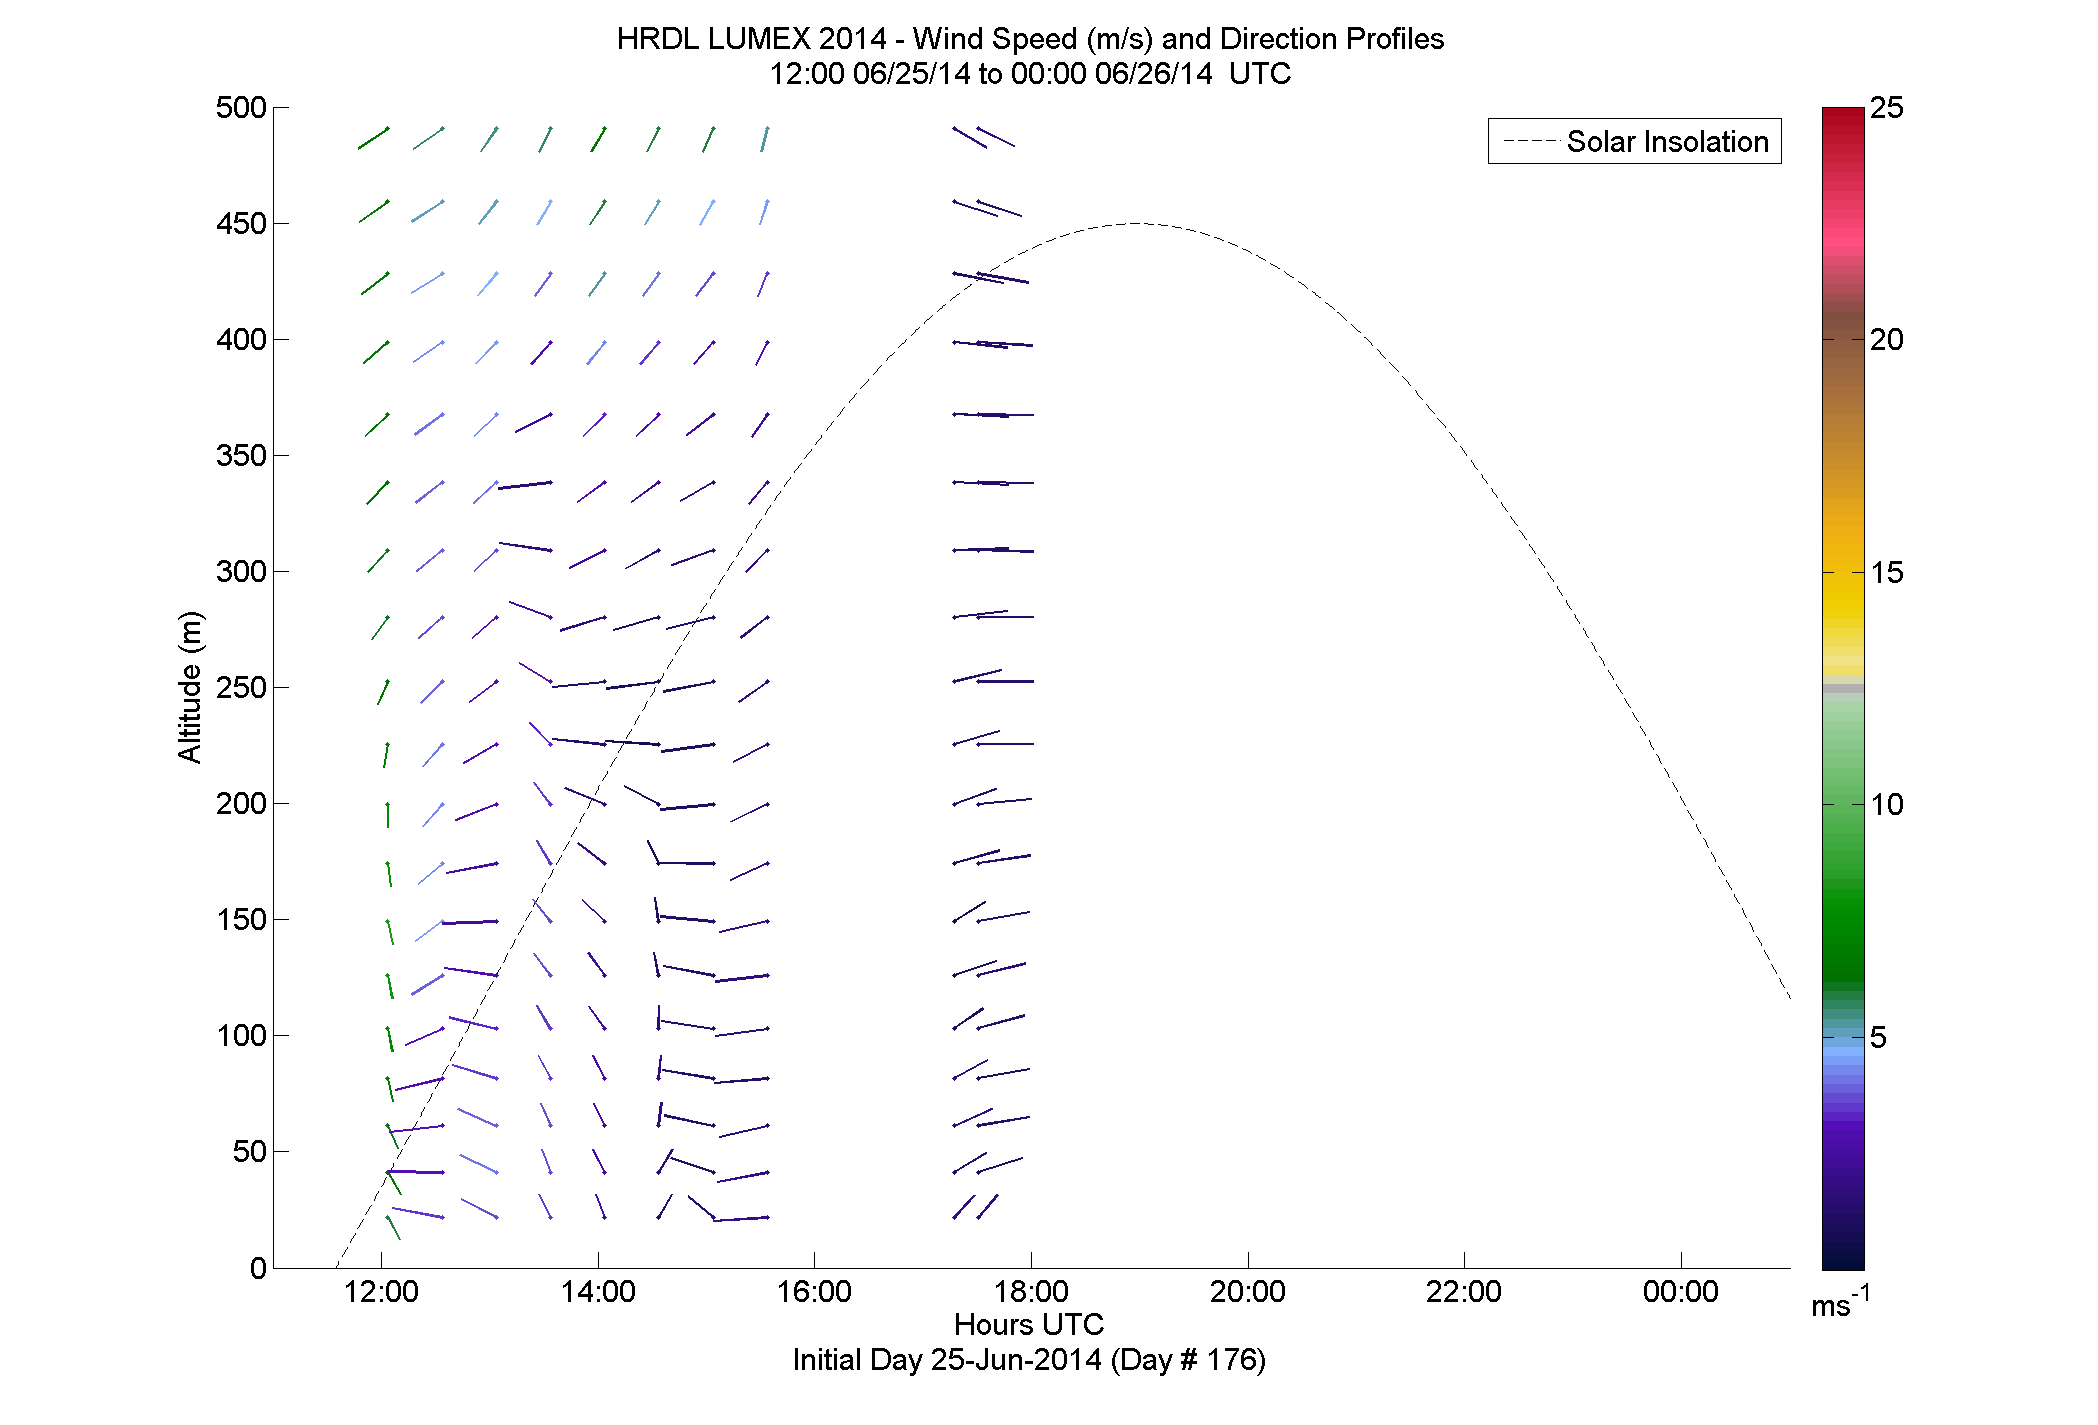 HRDL speed and direction profile - June 25 pm